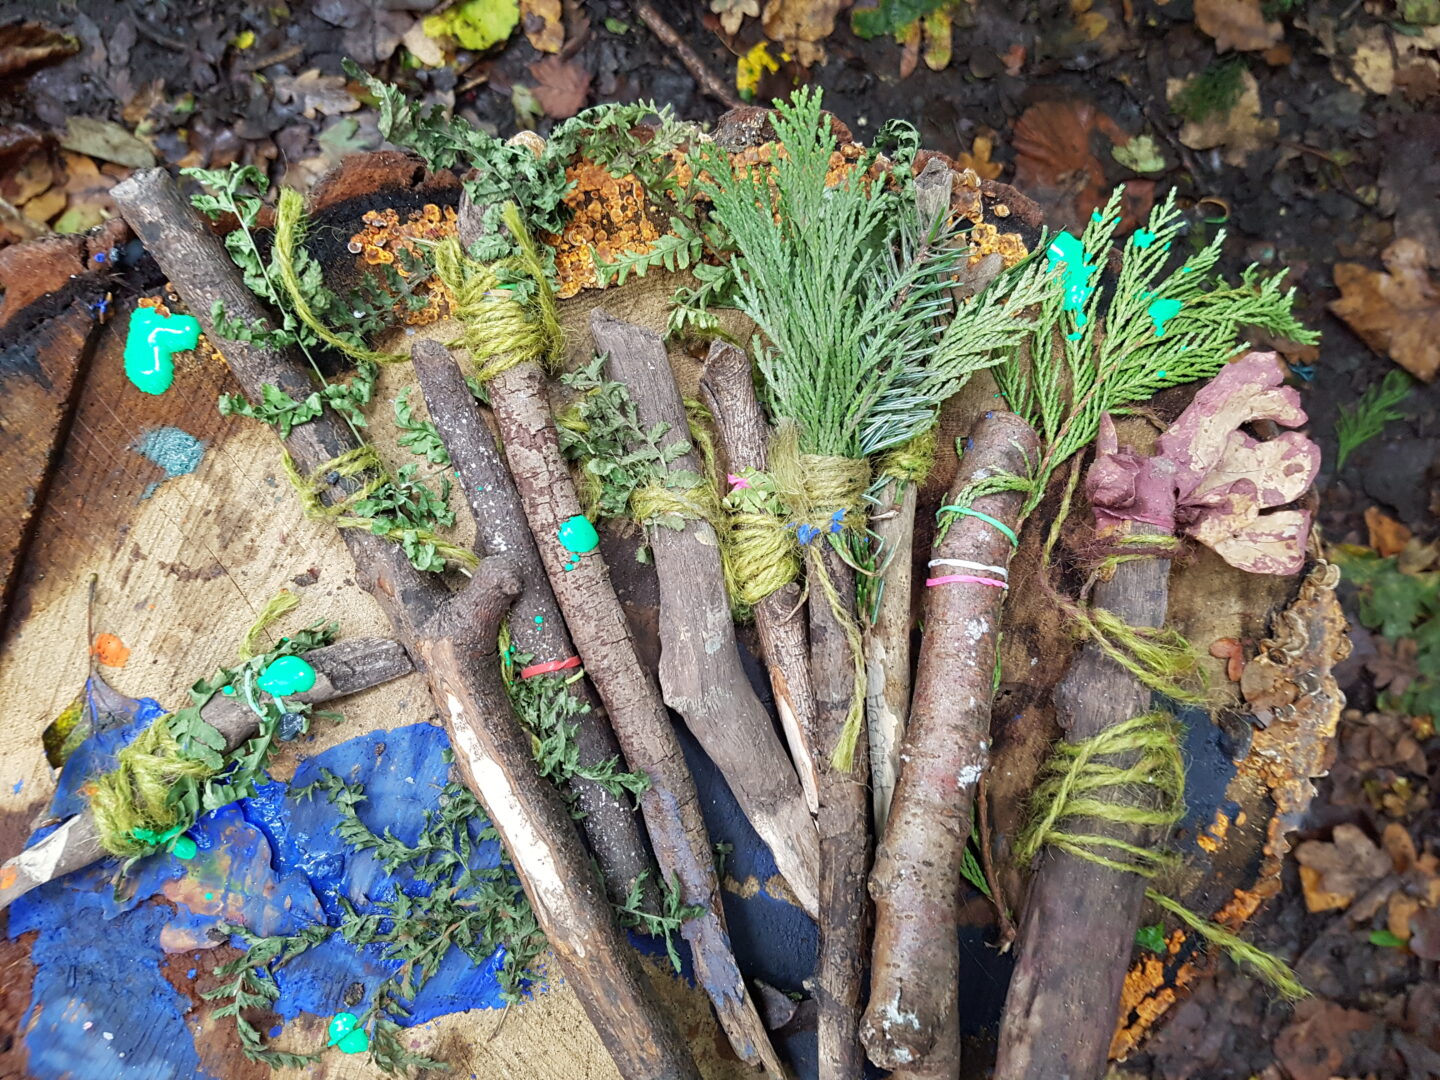 Forest School at Gorsey Bank Primary School